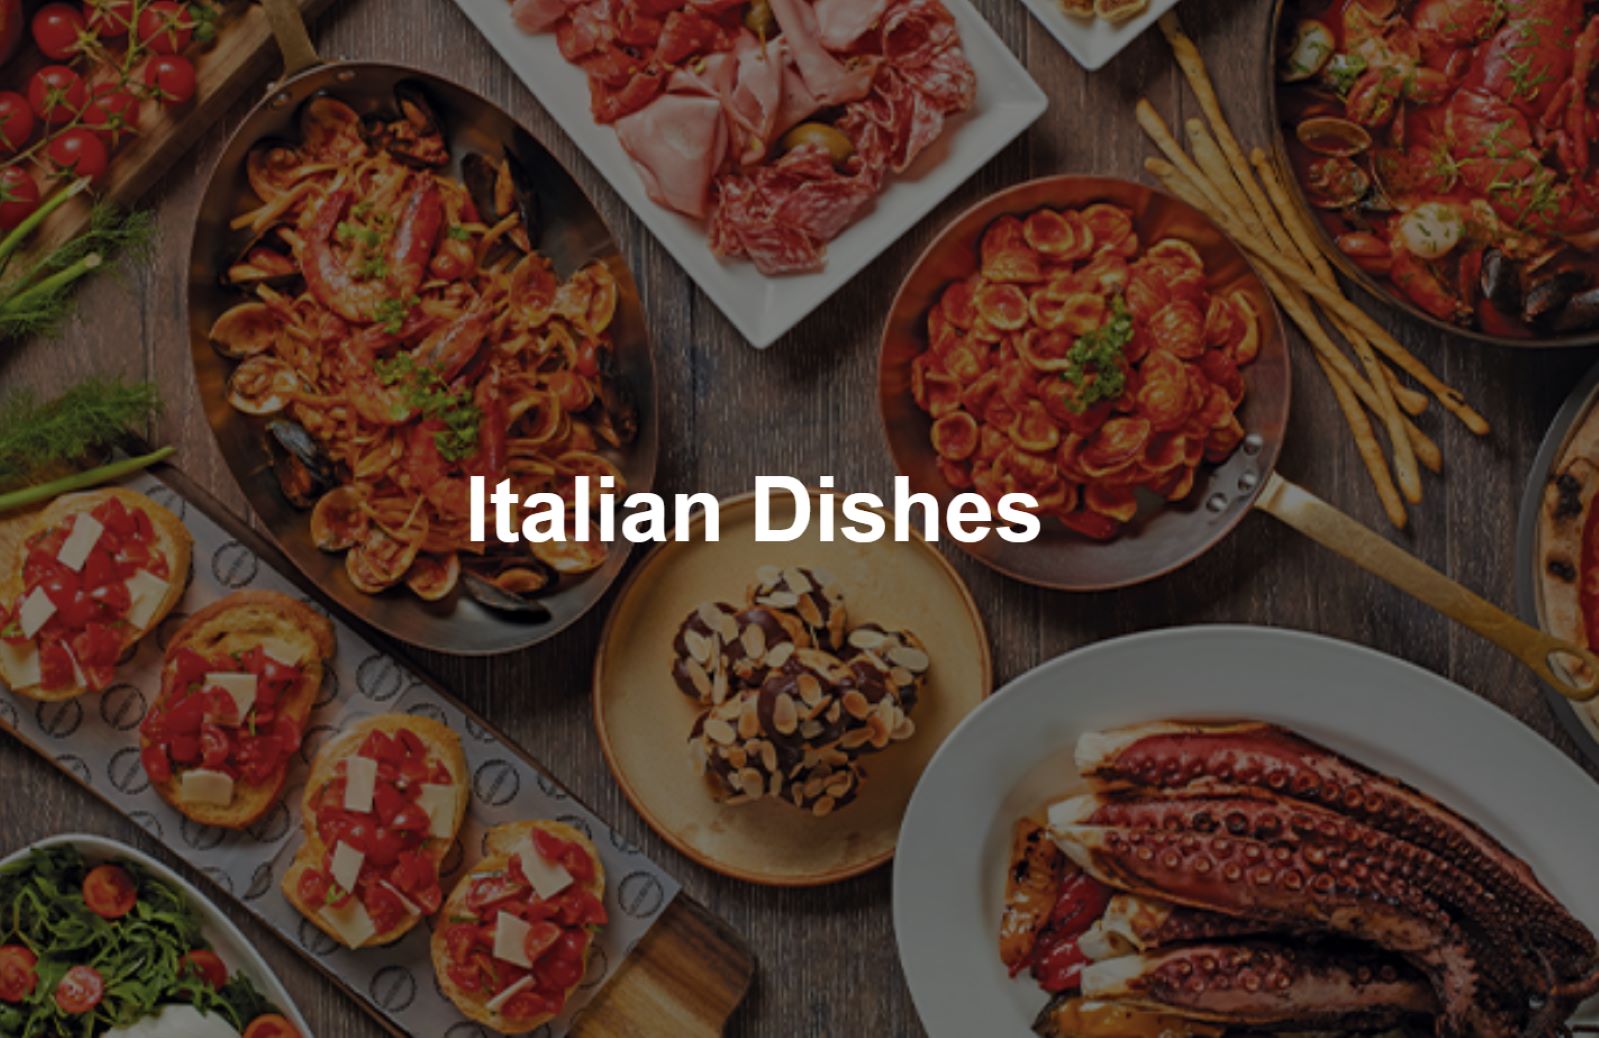 A table with various Italian dishes laid out